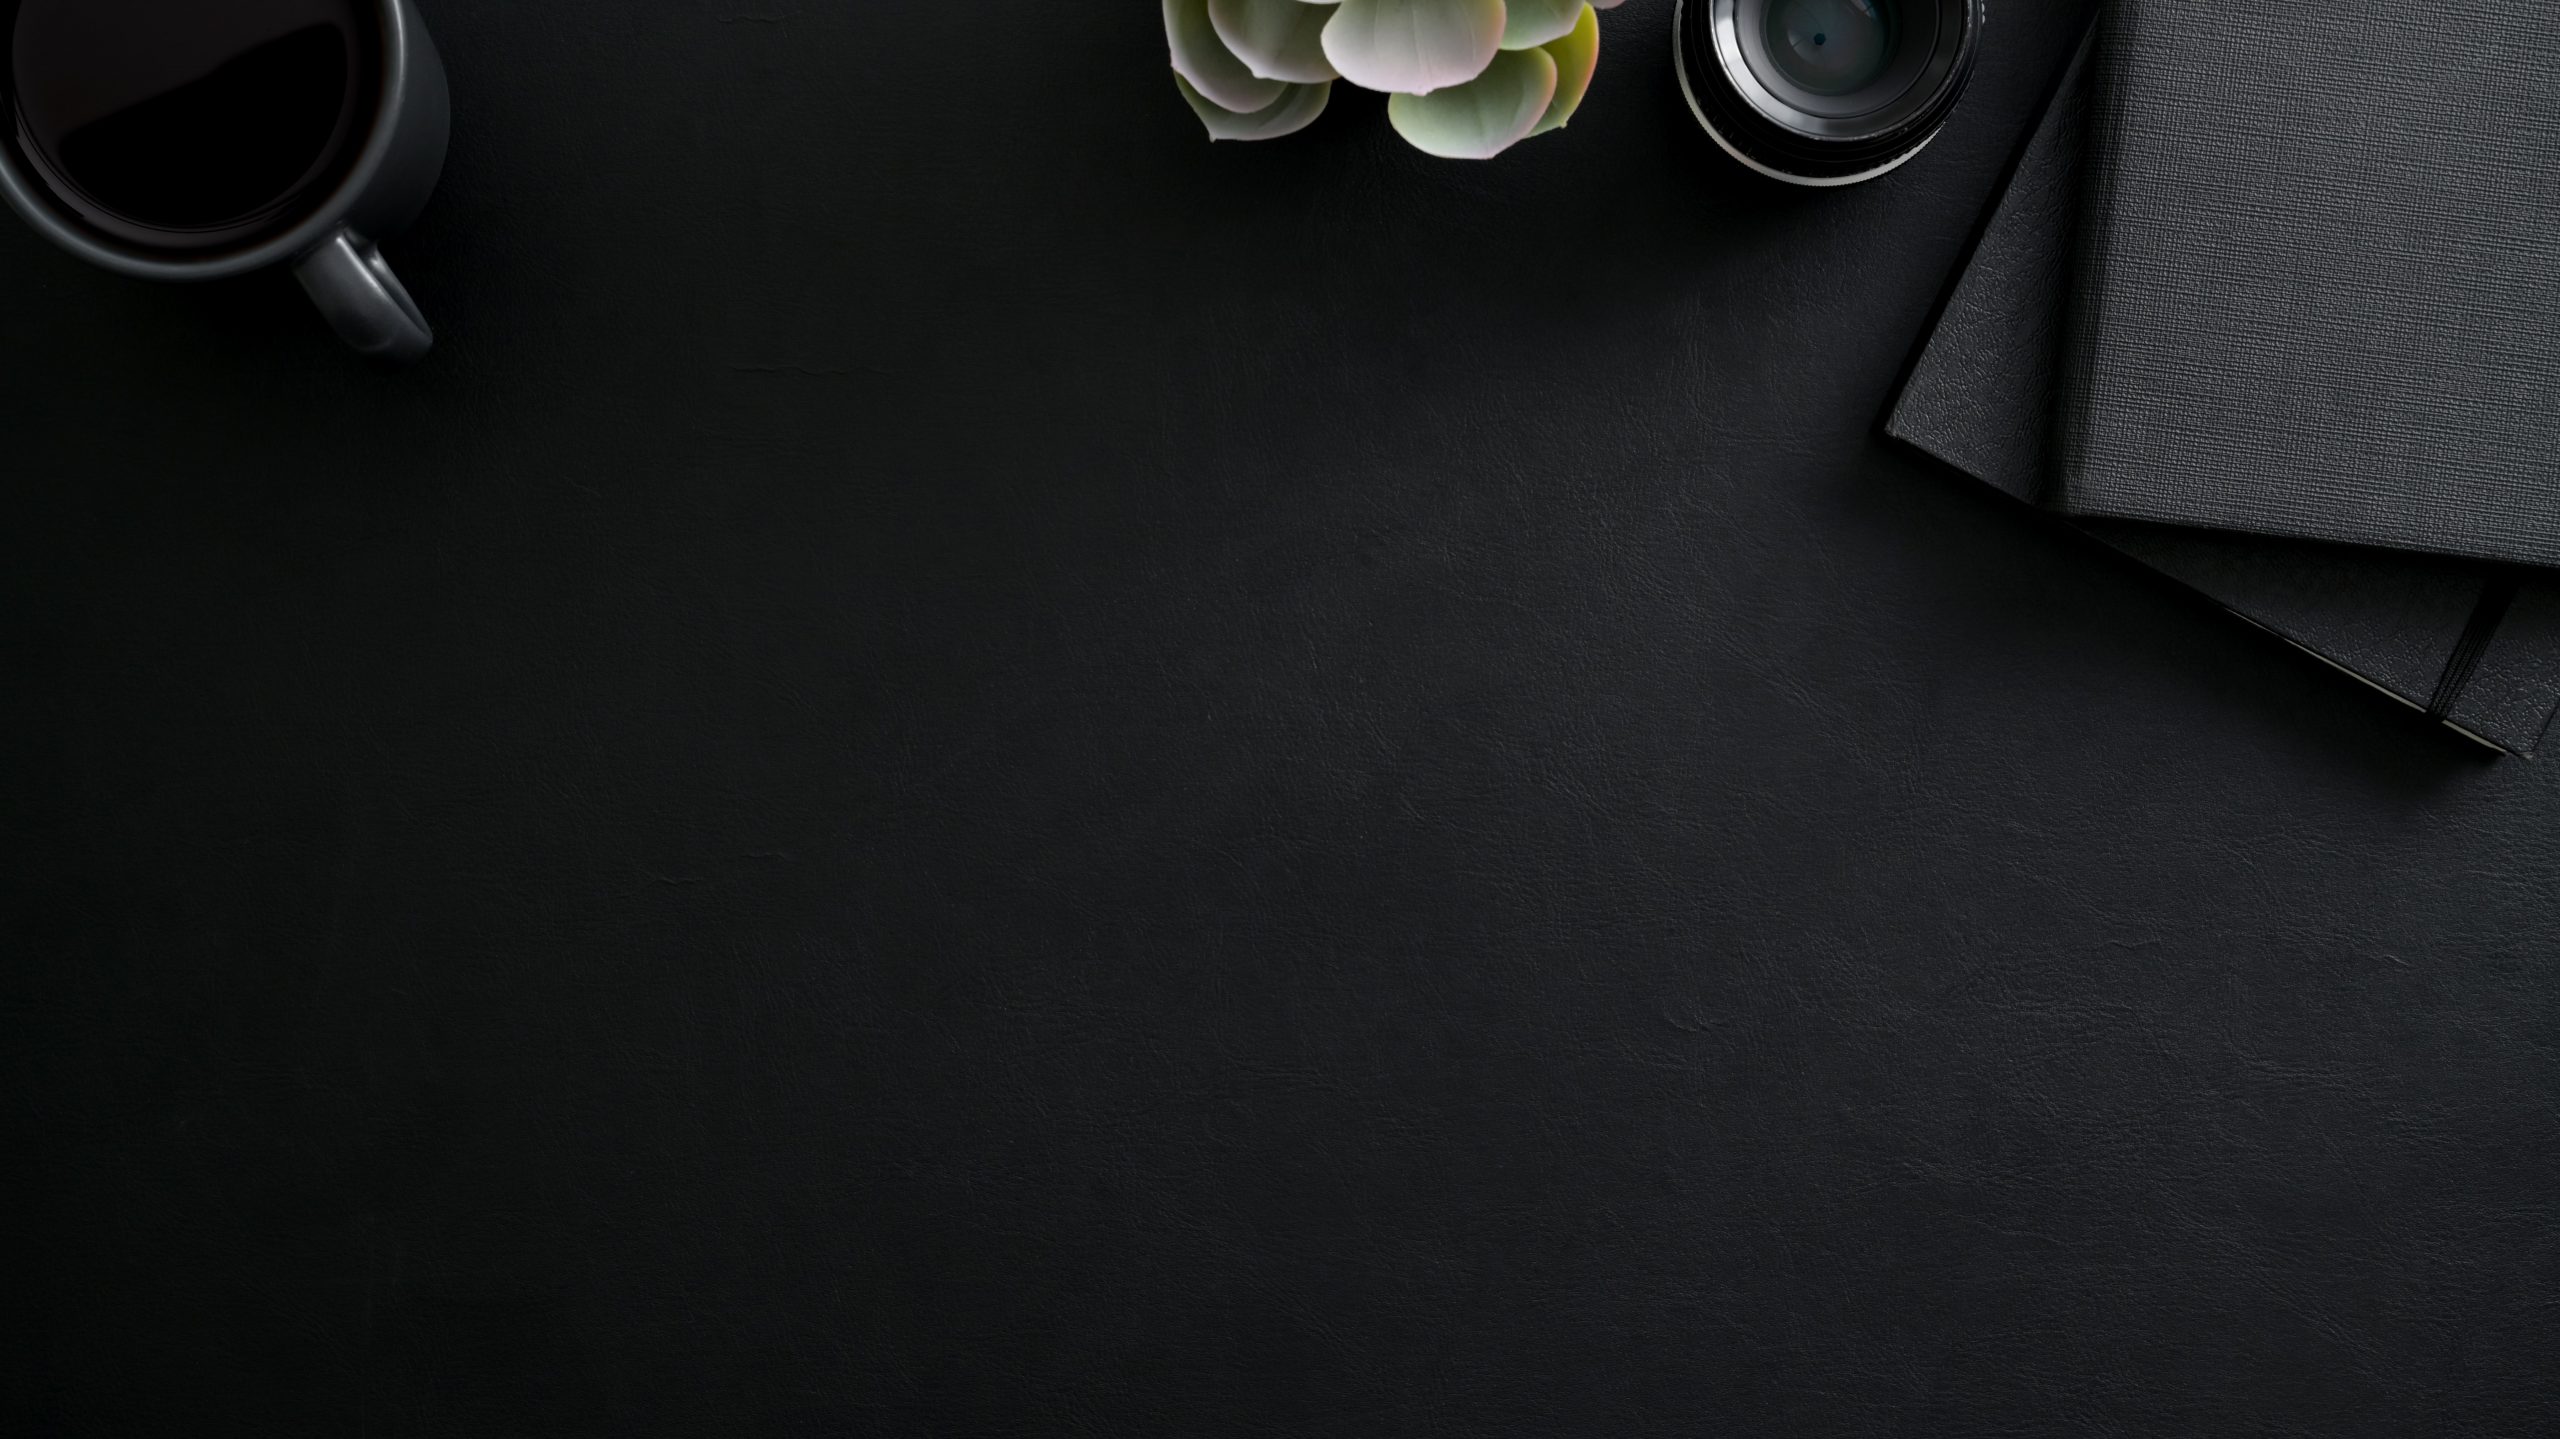 black-coffee-cup-and-black-notepad-on-black-table-3815759